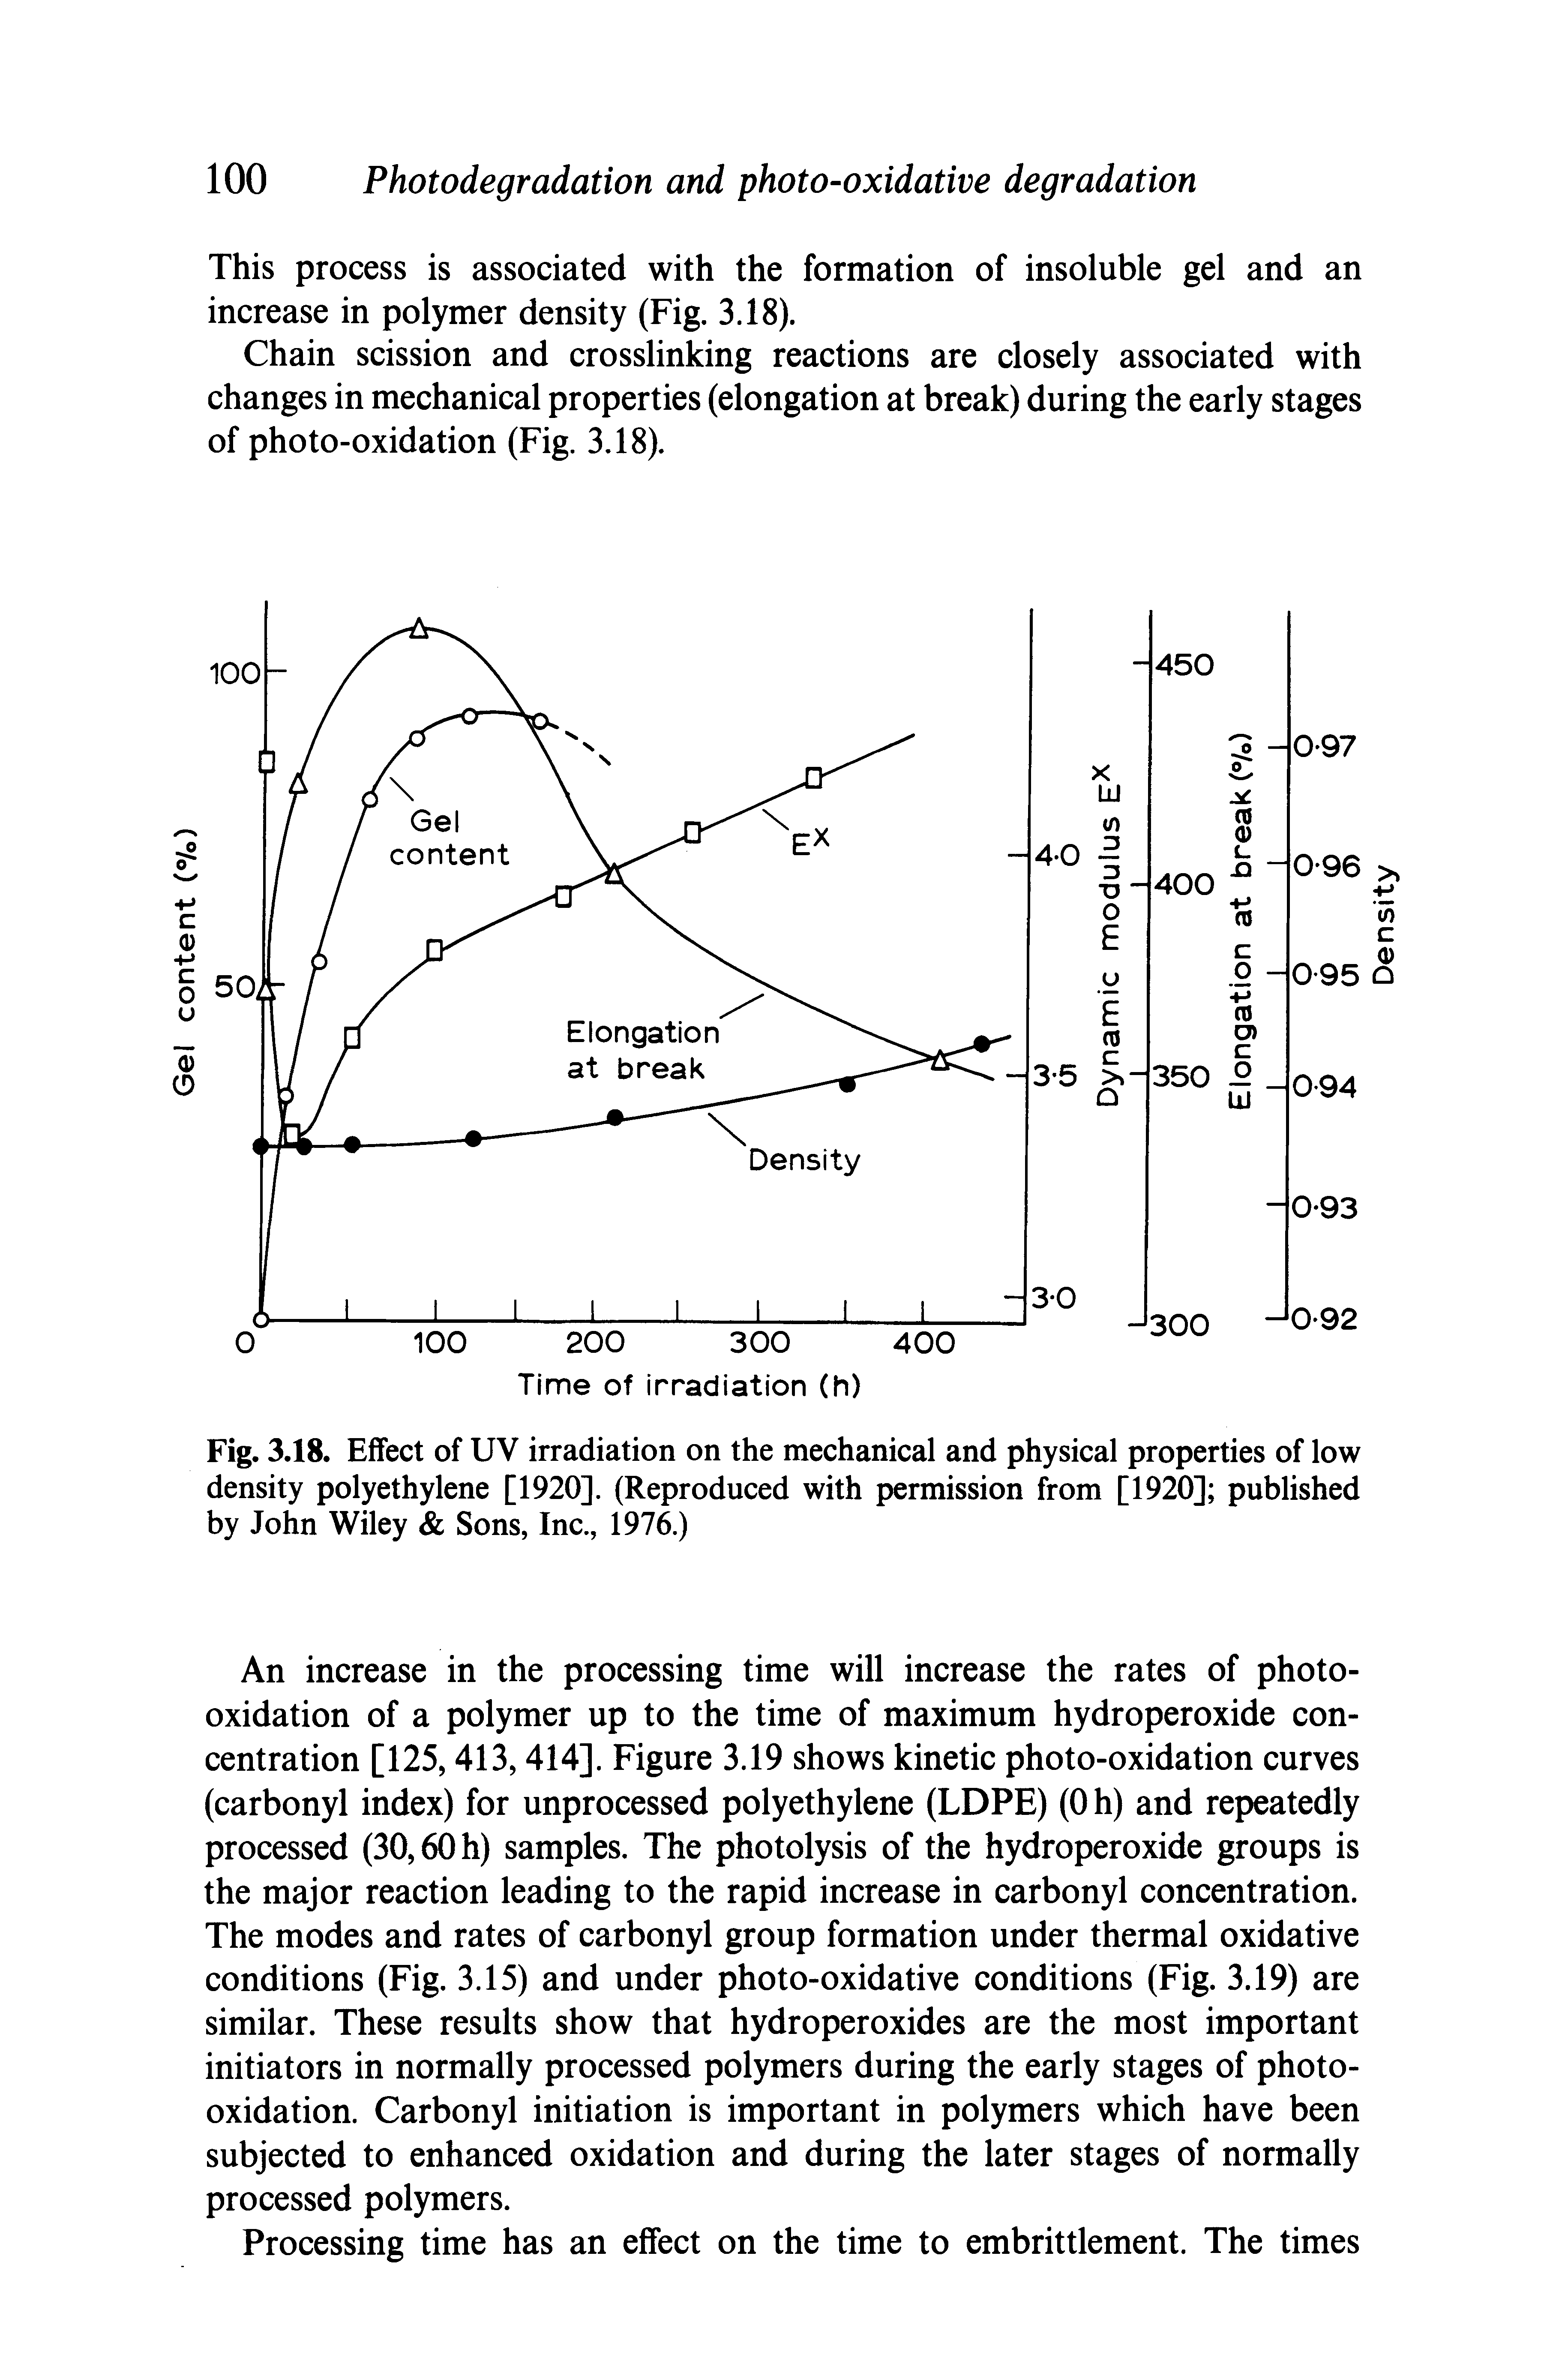 Fig. 3.18. Effect of UV irradiation on the mechanical and physical properties of low density polyethylene [1920]. (Reproduced with permission from [1920] published by John Wiley Sons, Inc., 1976.)...